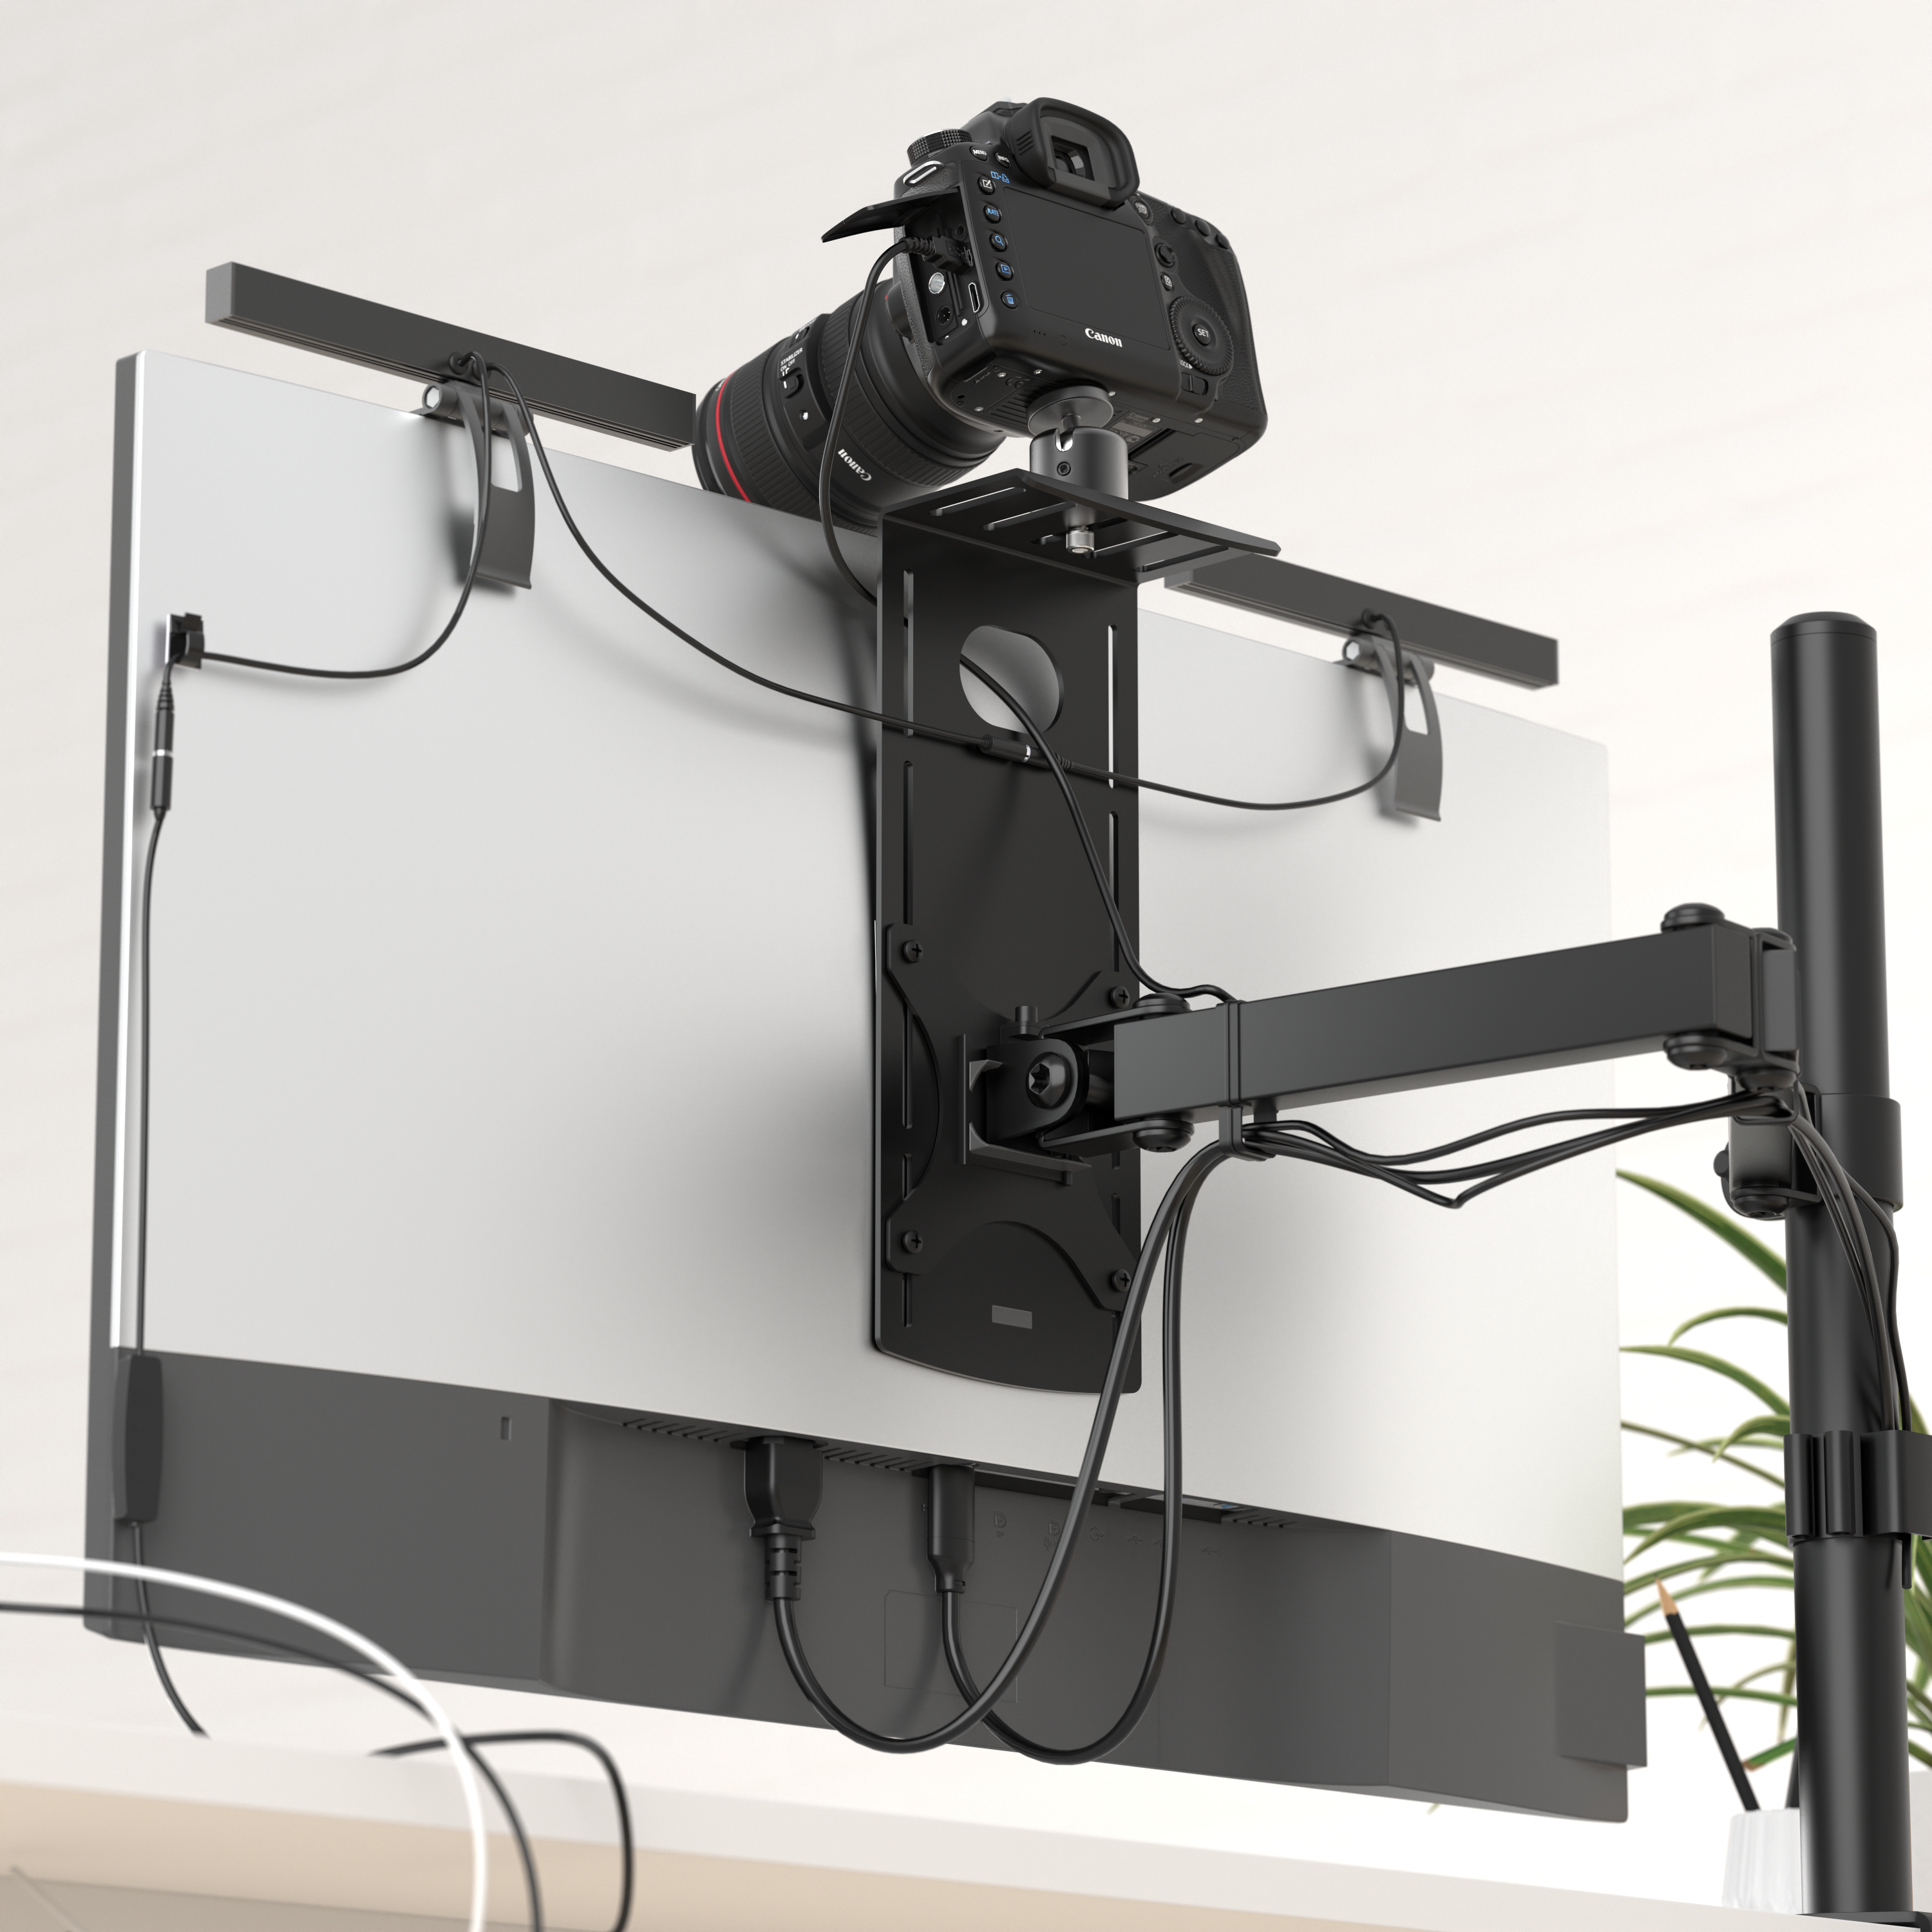 HumanCentric DSLR Monitor Mount – Light Webcam and Microphone Camera Shelf for Monitor VESA Arm, Replace Clamp Tripods for Camera Desk Mount, Large